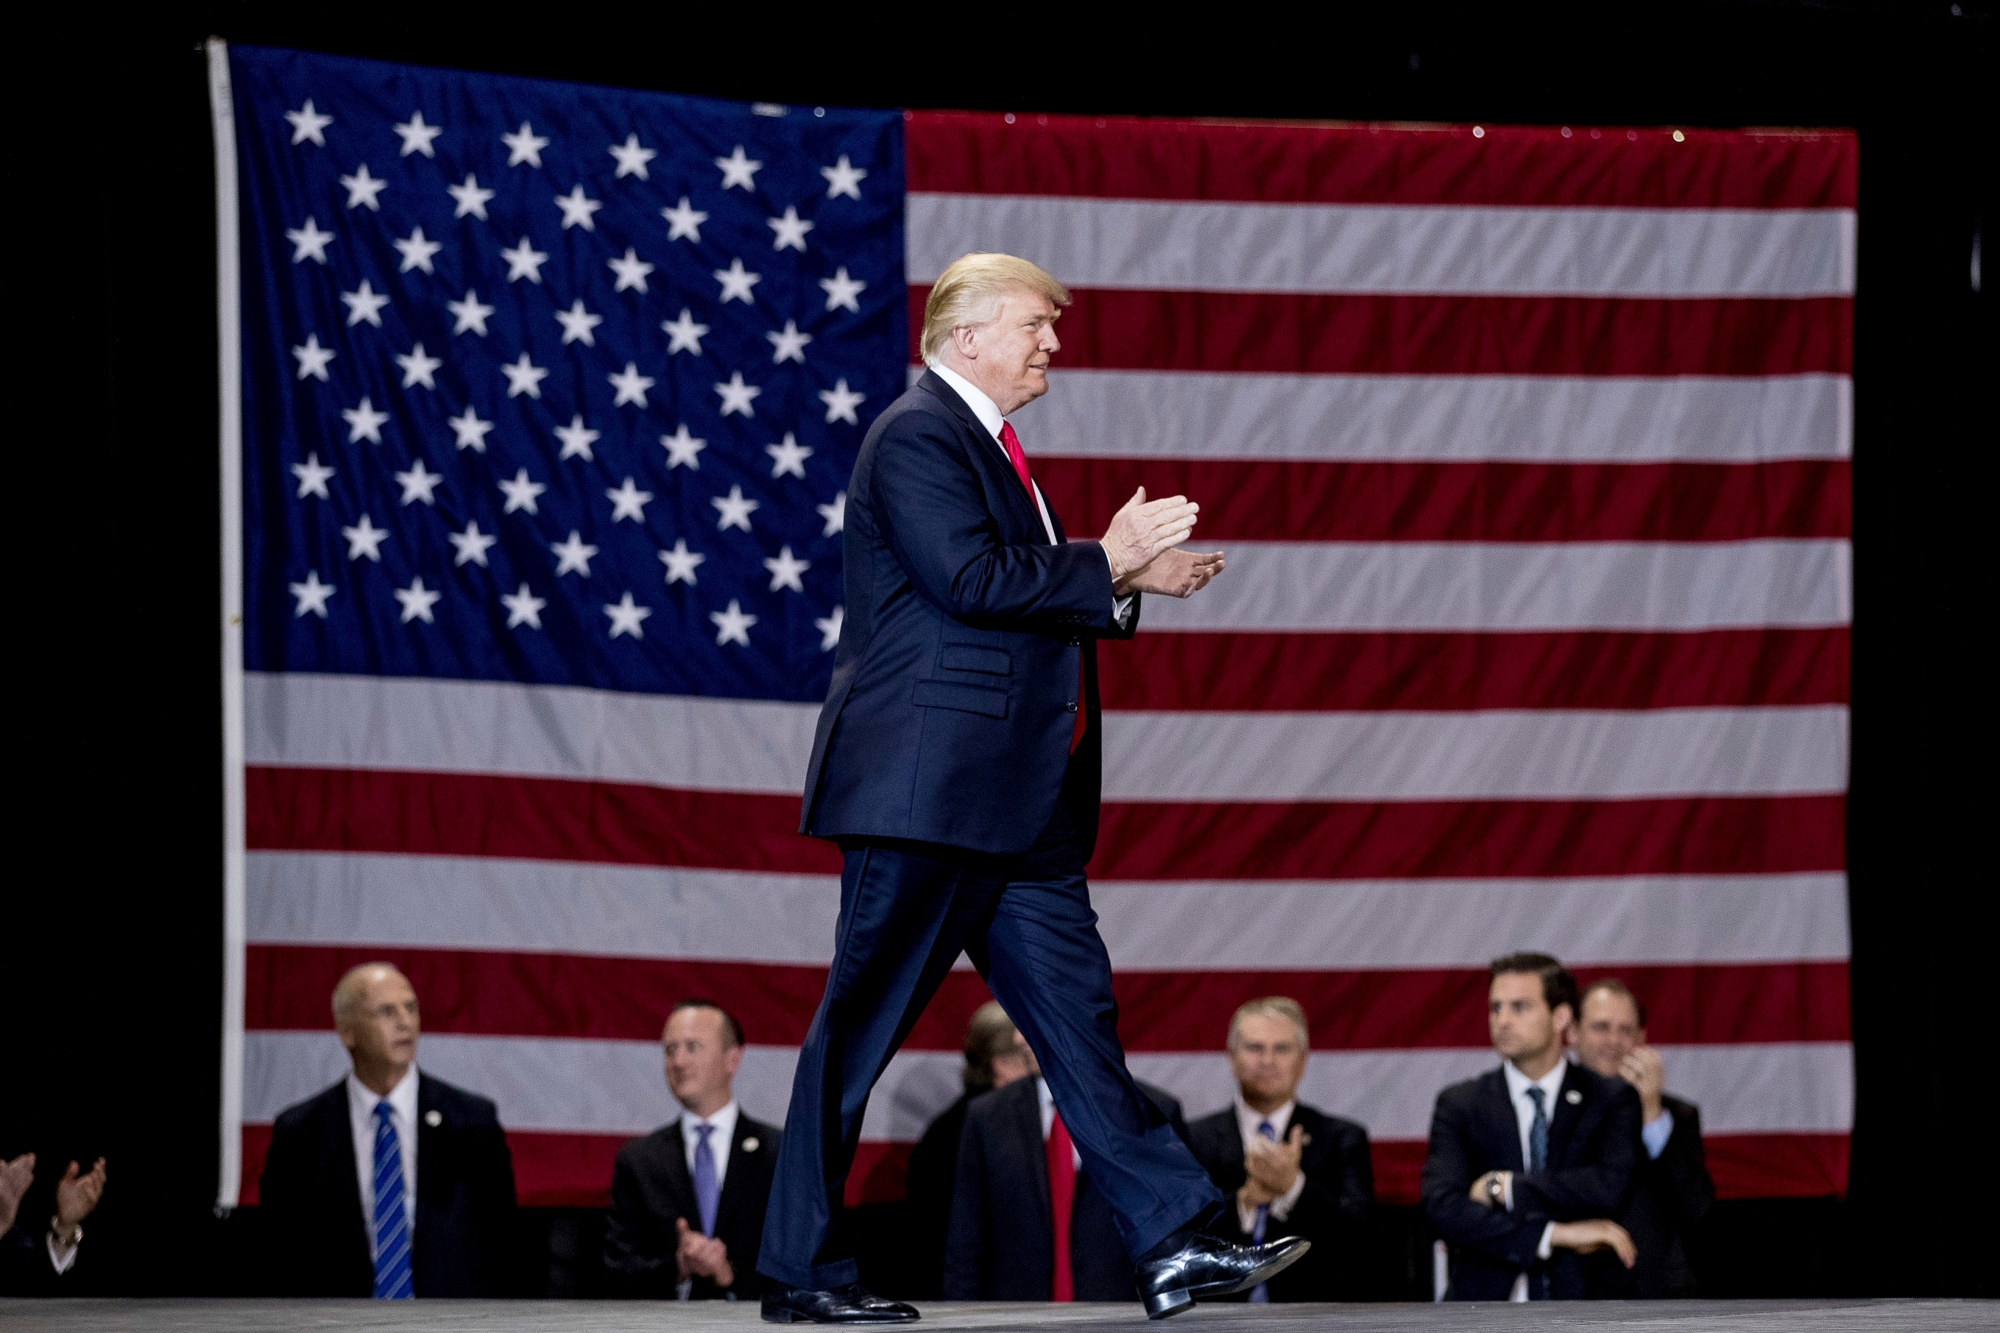 DAY 60 - In this March 20, 2017, file photo, President Donald Trump arrives to speak at a rally at the Kentucky Exposition Center in Louisville, Ky. (AP Photo/Andrew Harnik, File) Trump 100 - 100 Photos